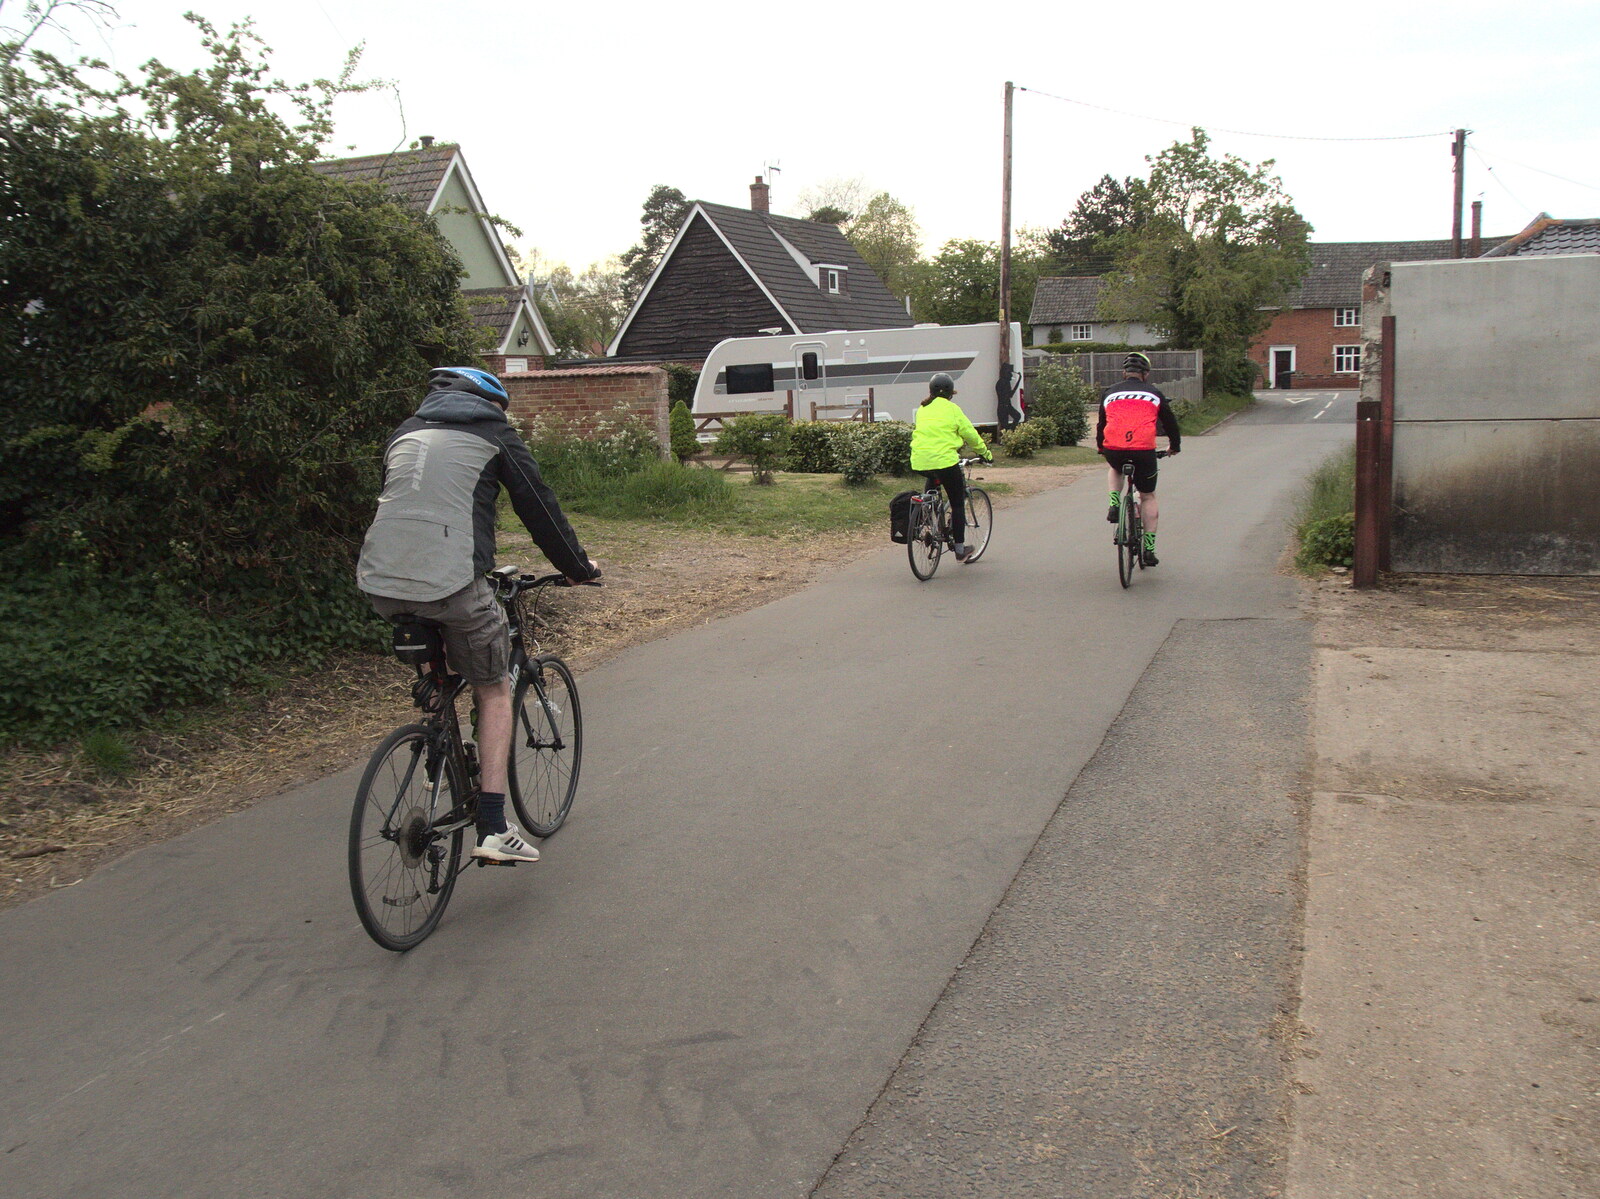 The BSCC rides off from The BSCC at the King's Head, Brockdish, Norfolk - 13th May 2021